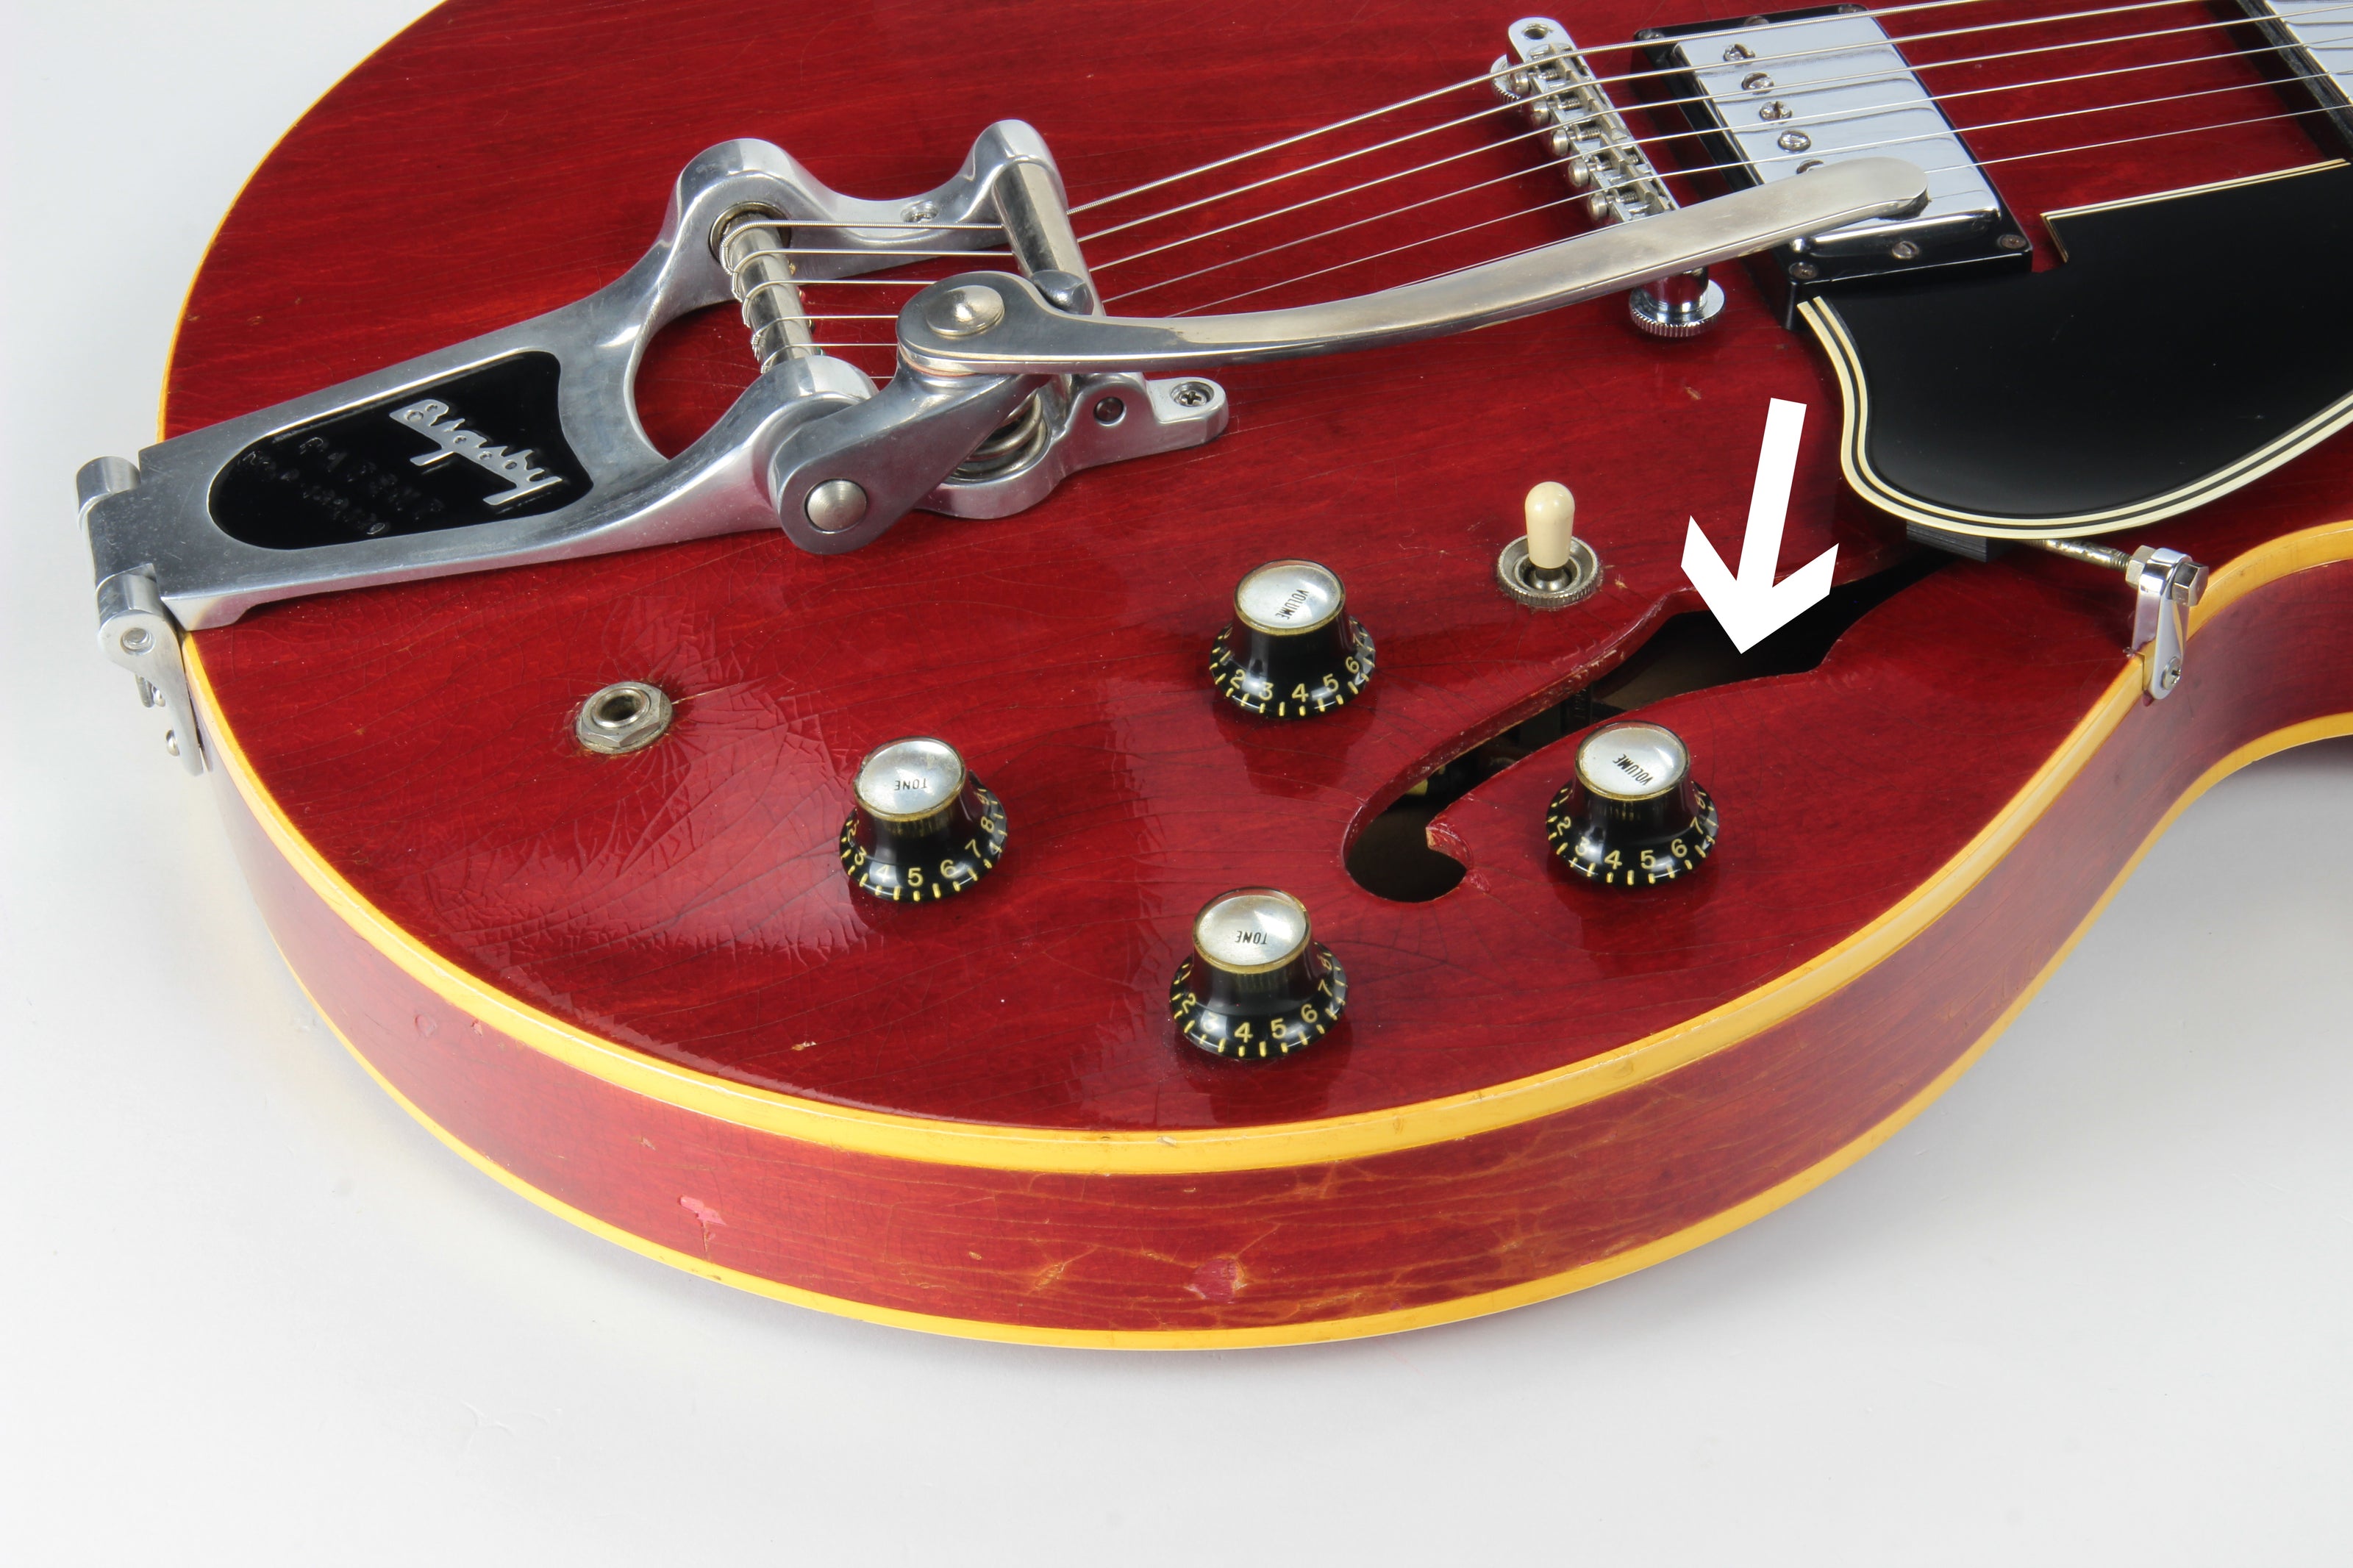 1960's Gibson ES-335 with arrow pointing to treble f-hole